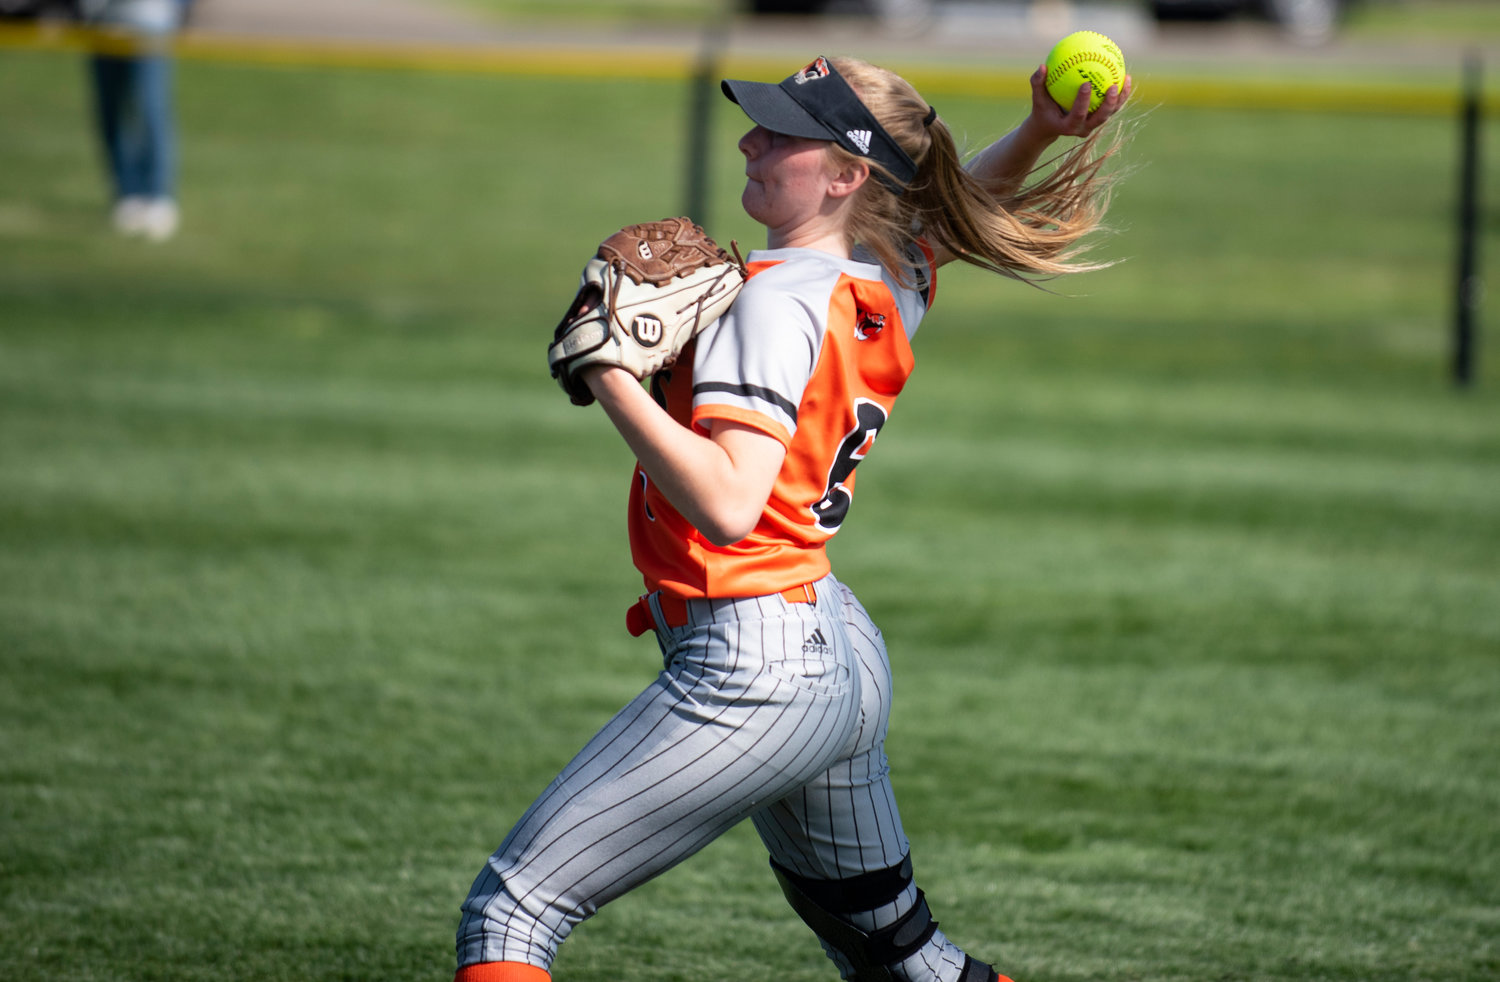 Centralia's Hannah Robbins makes a throw from right field on Tuesday.